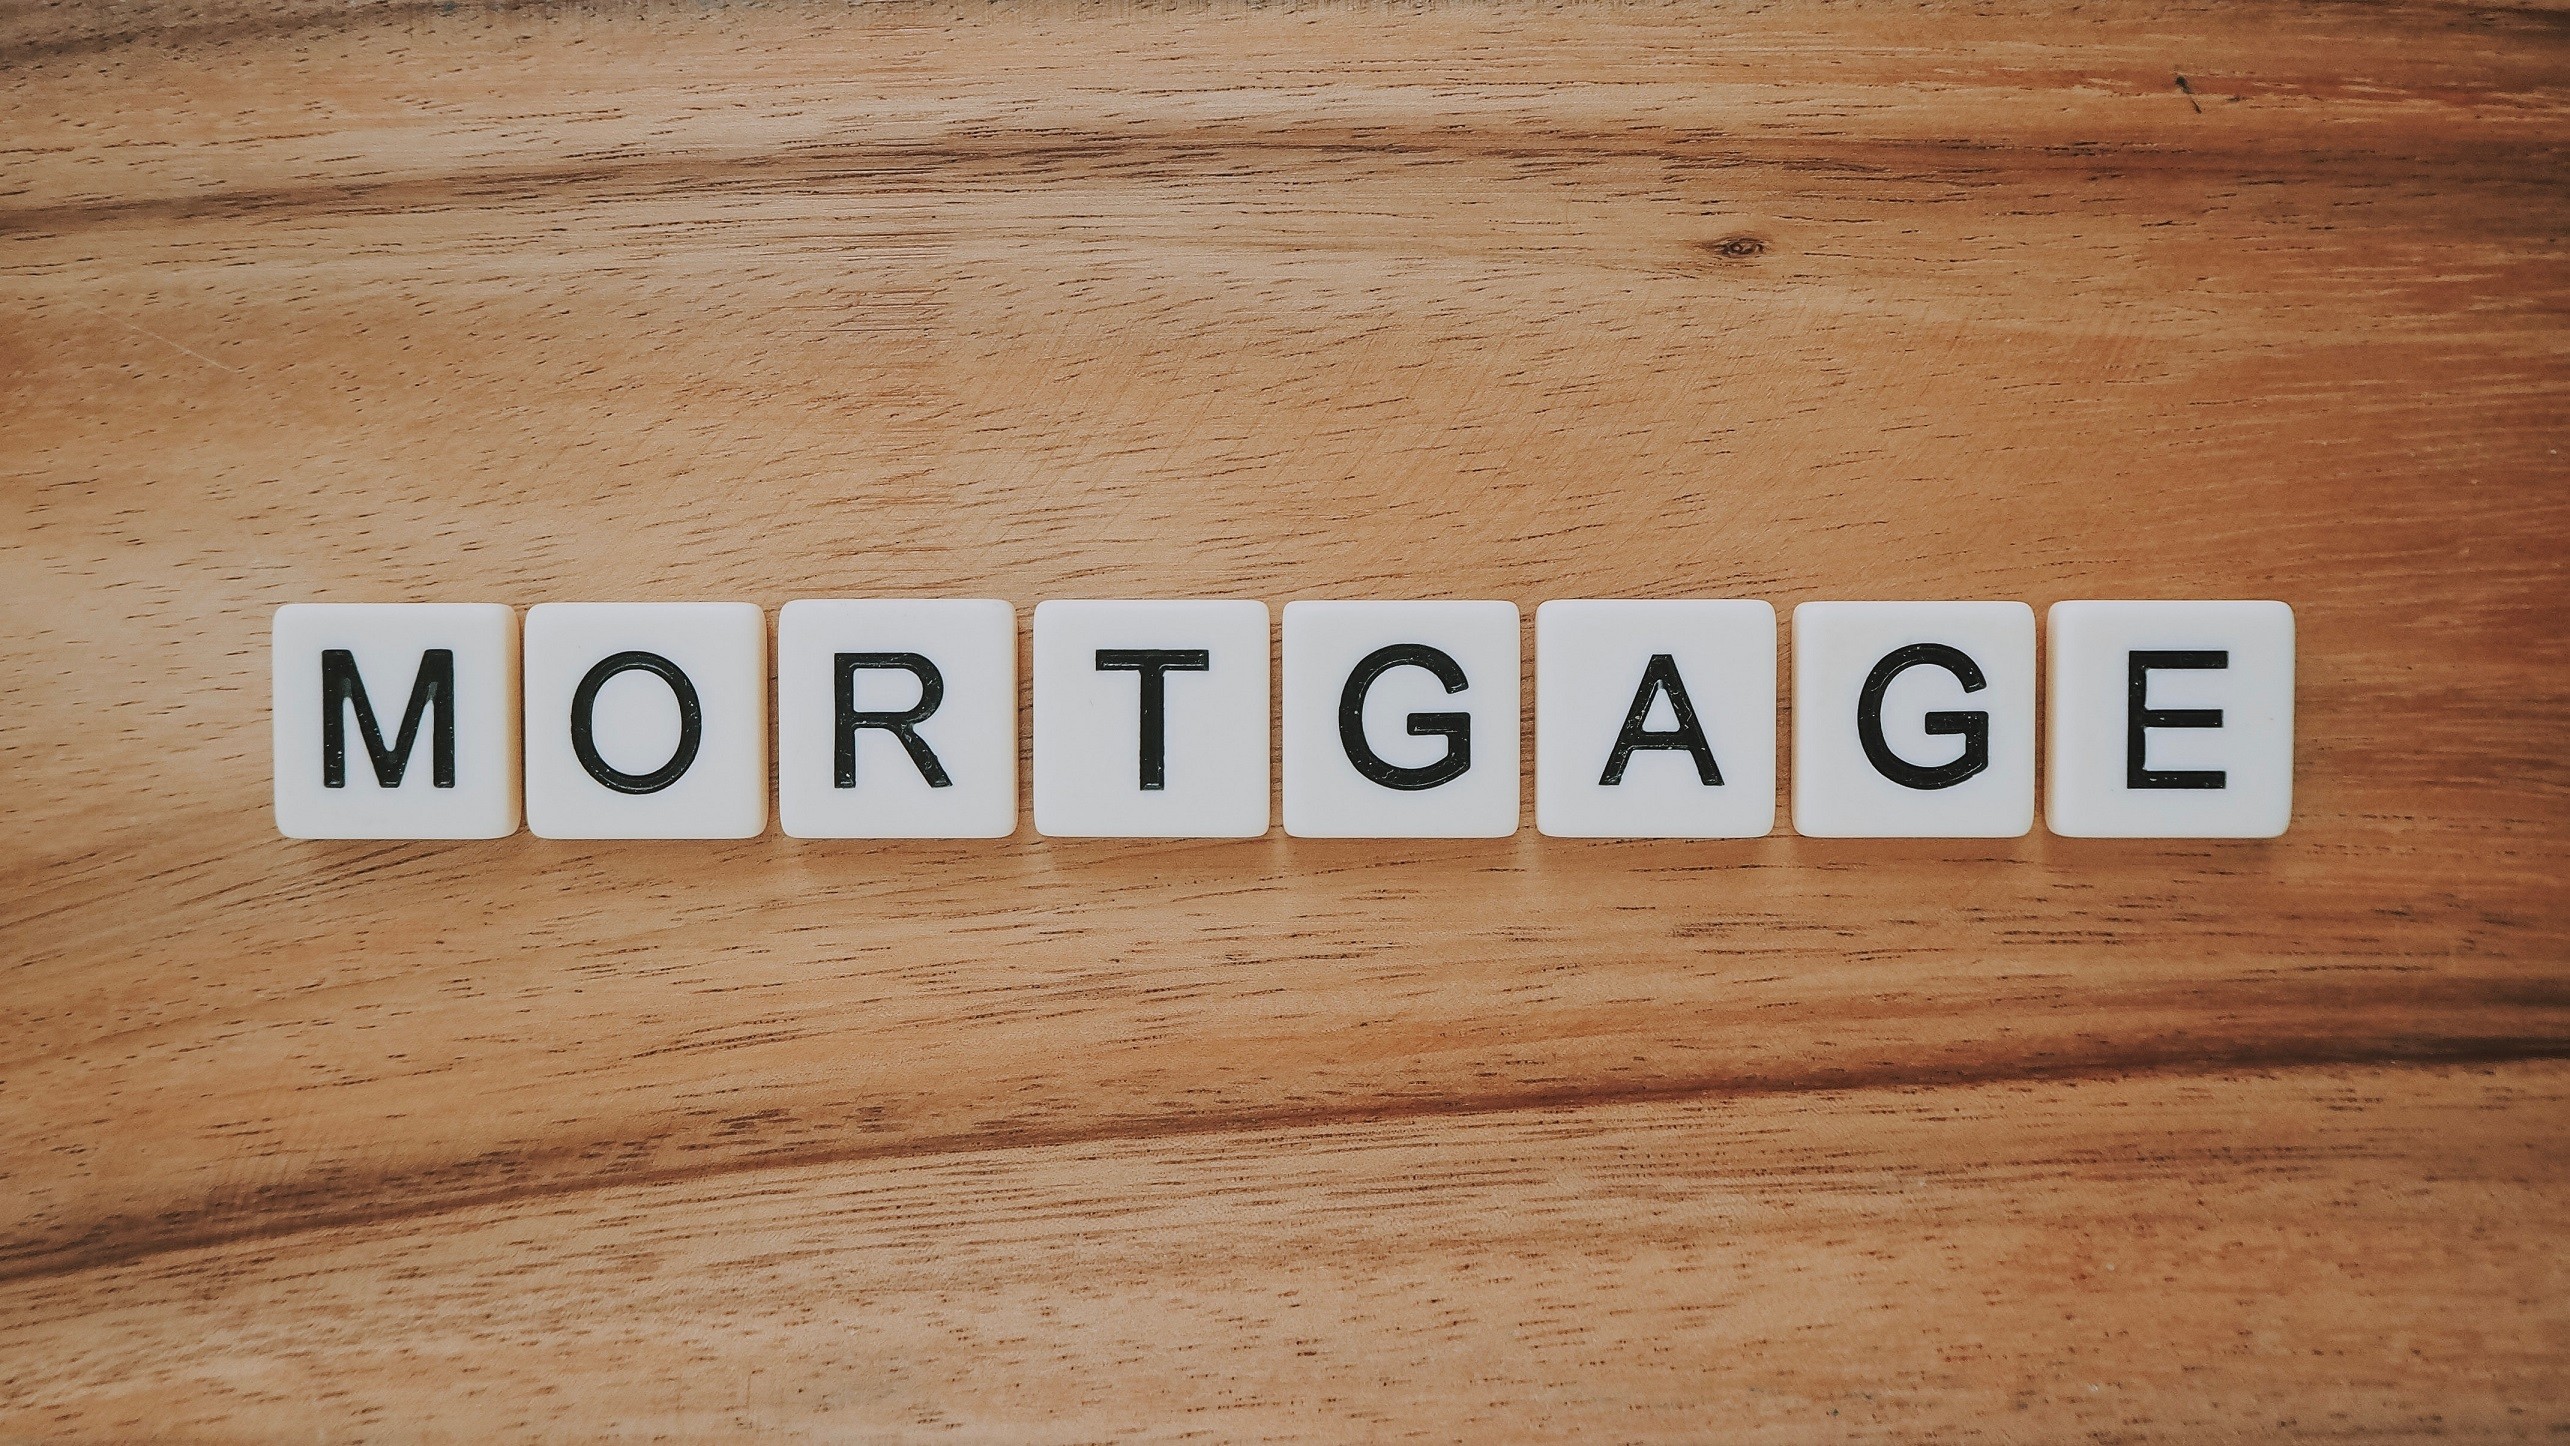 Procedure for valuation of the mortgaged property